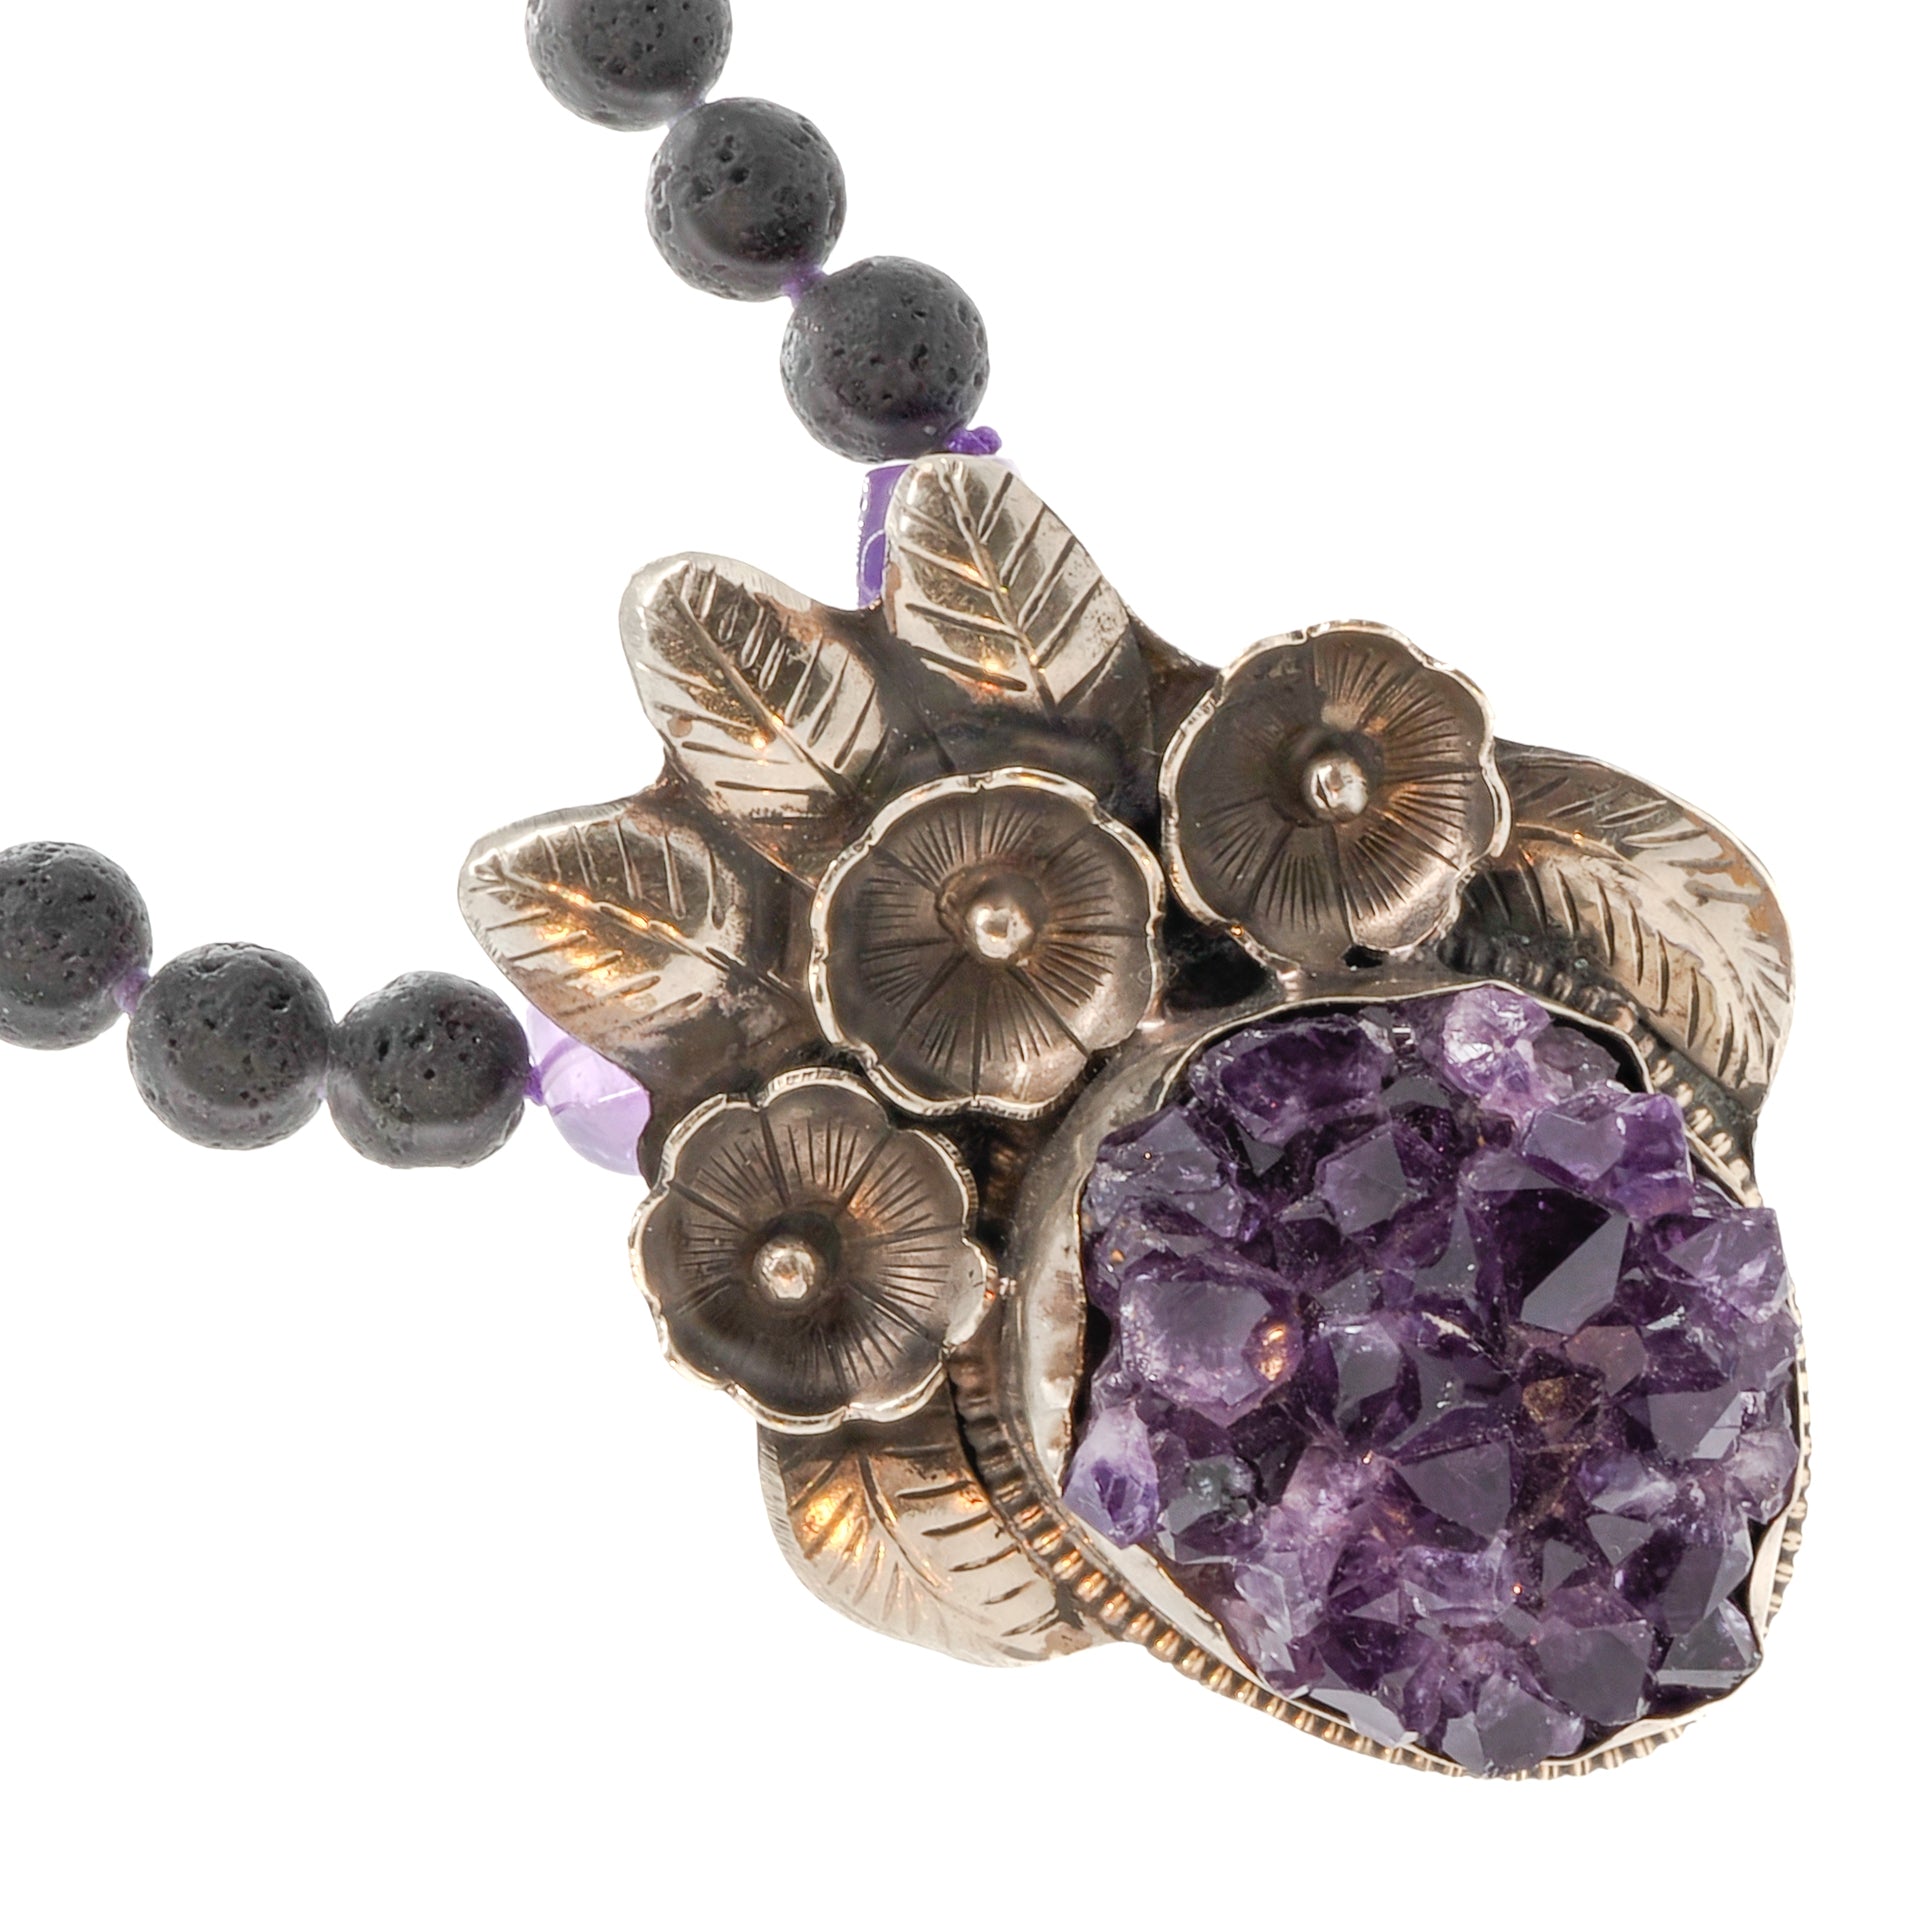 Spiritual Amethyst Necklace crafted with natural amethyst stone beads and a flower silver pendant, radiating tranquility and spirituality.